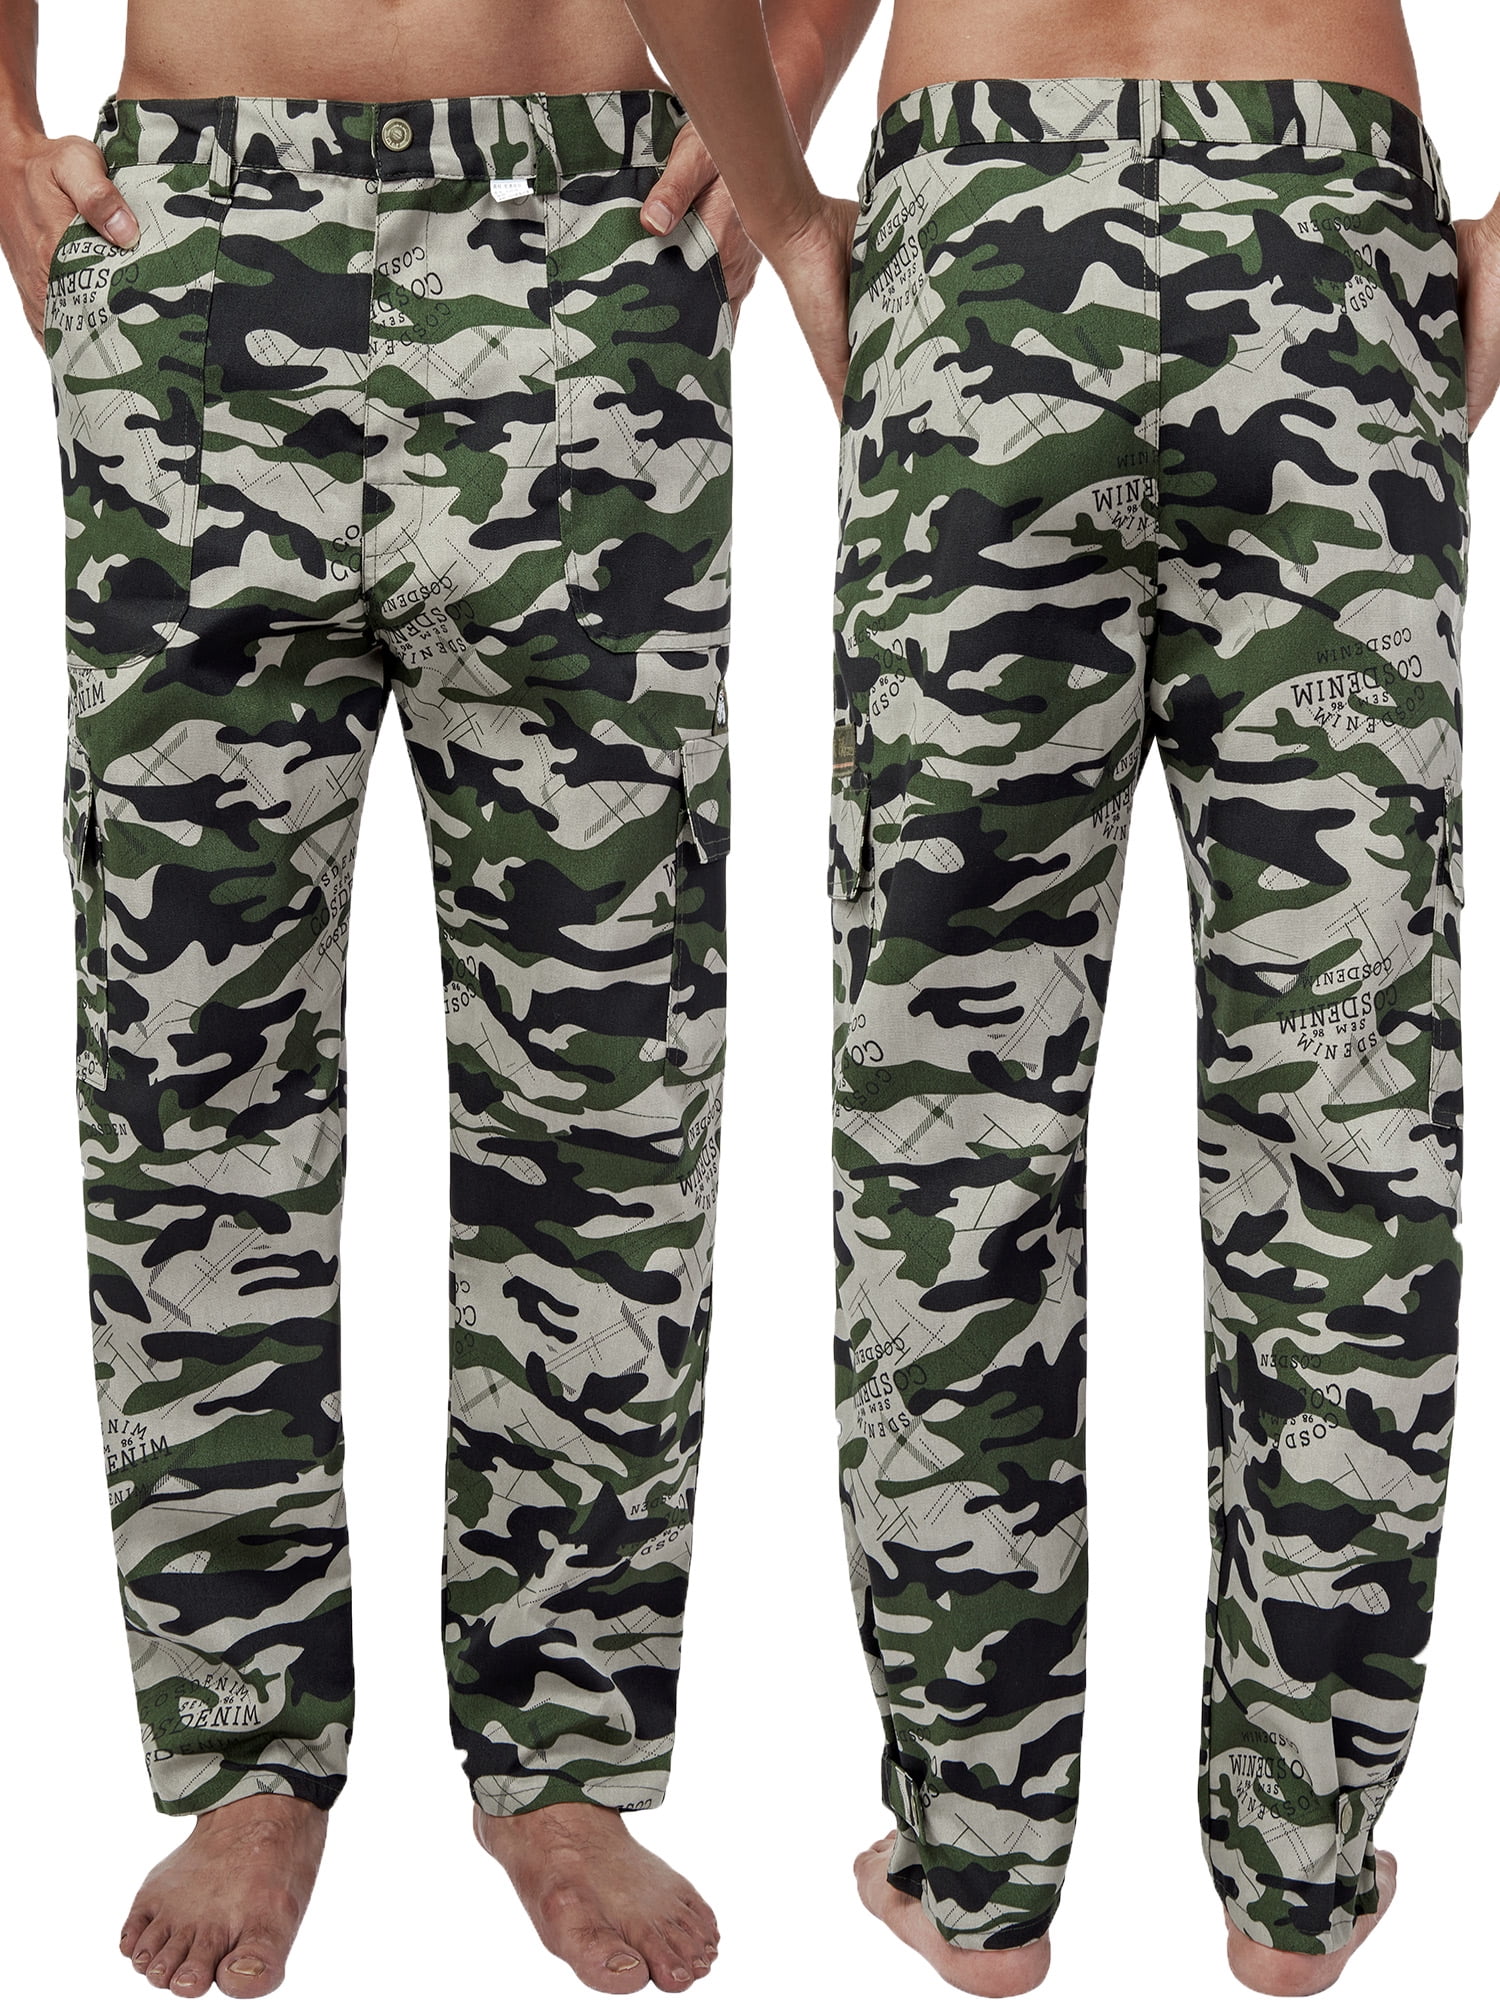 Army Tactical Trousers Cargo Mens Combats BDU Style Work Pants Dark Camo S-3XL 